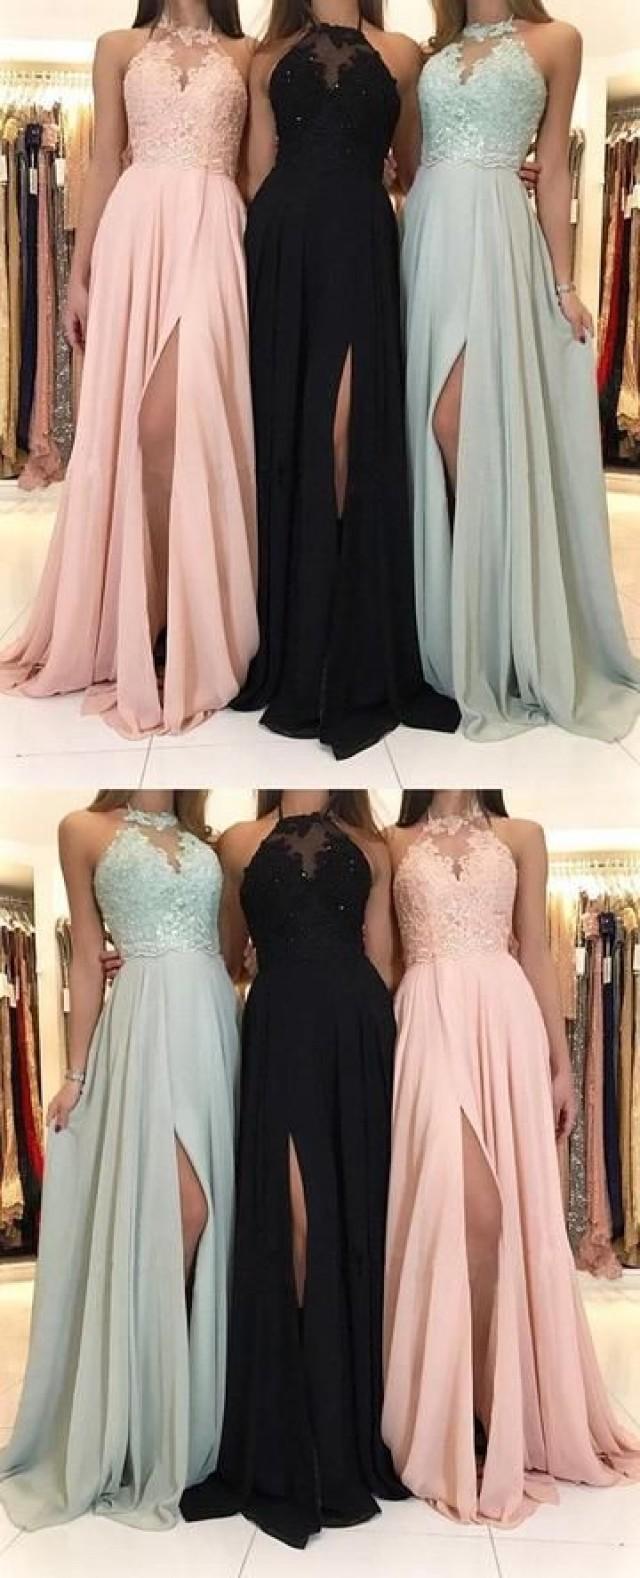 Please Browse Through Our Bridesmaid Dresses And Shop Online With Confidence As Our Site Is Safe And Secure. Be Sure To Pay Close Attention To The … 